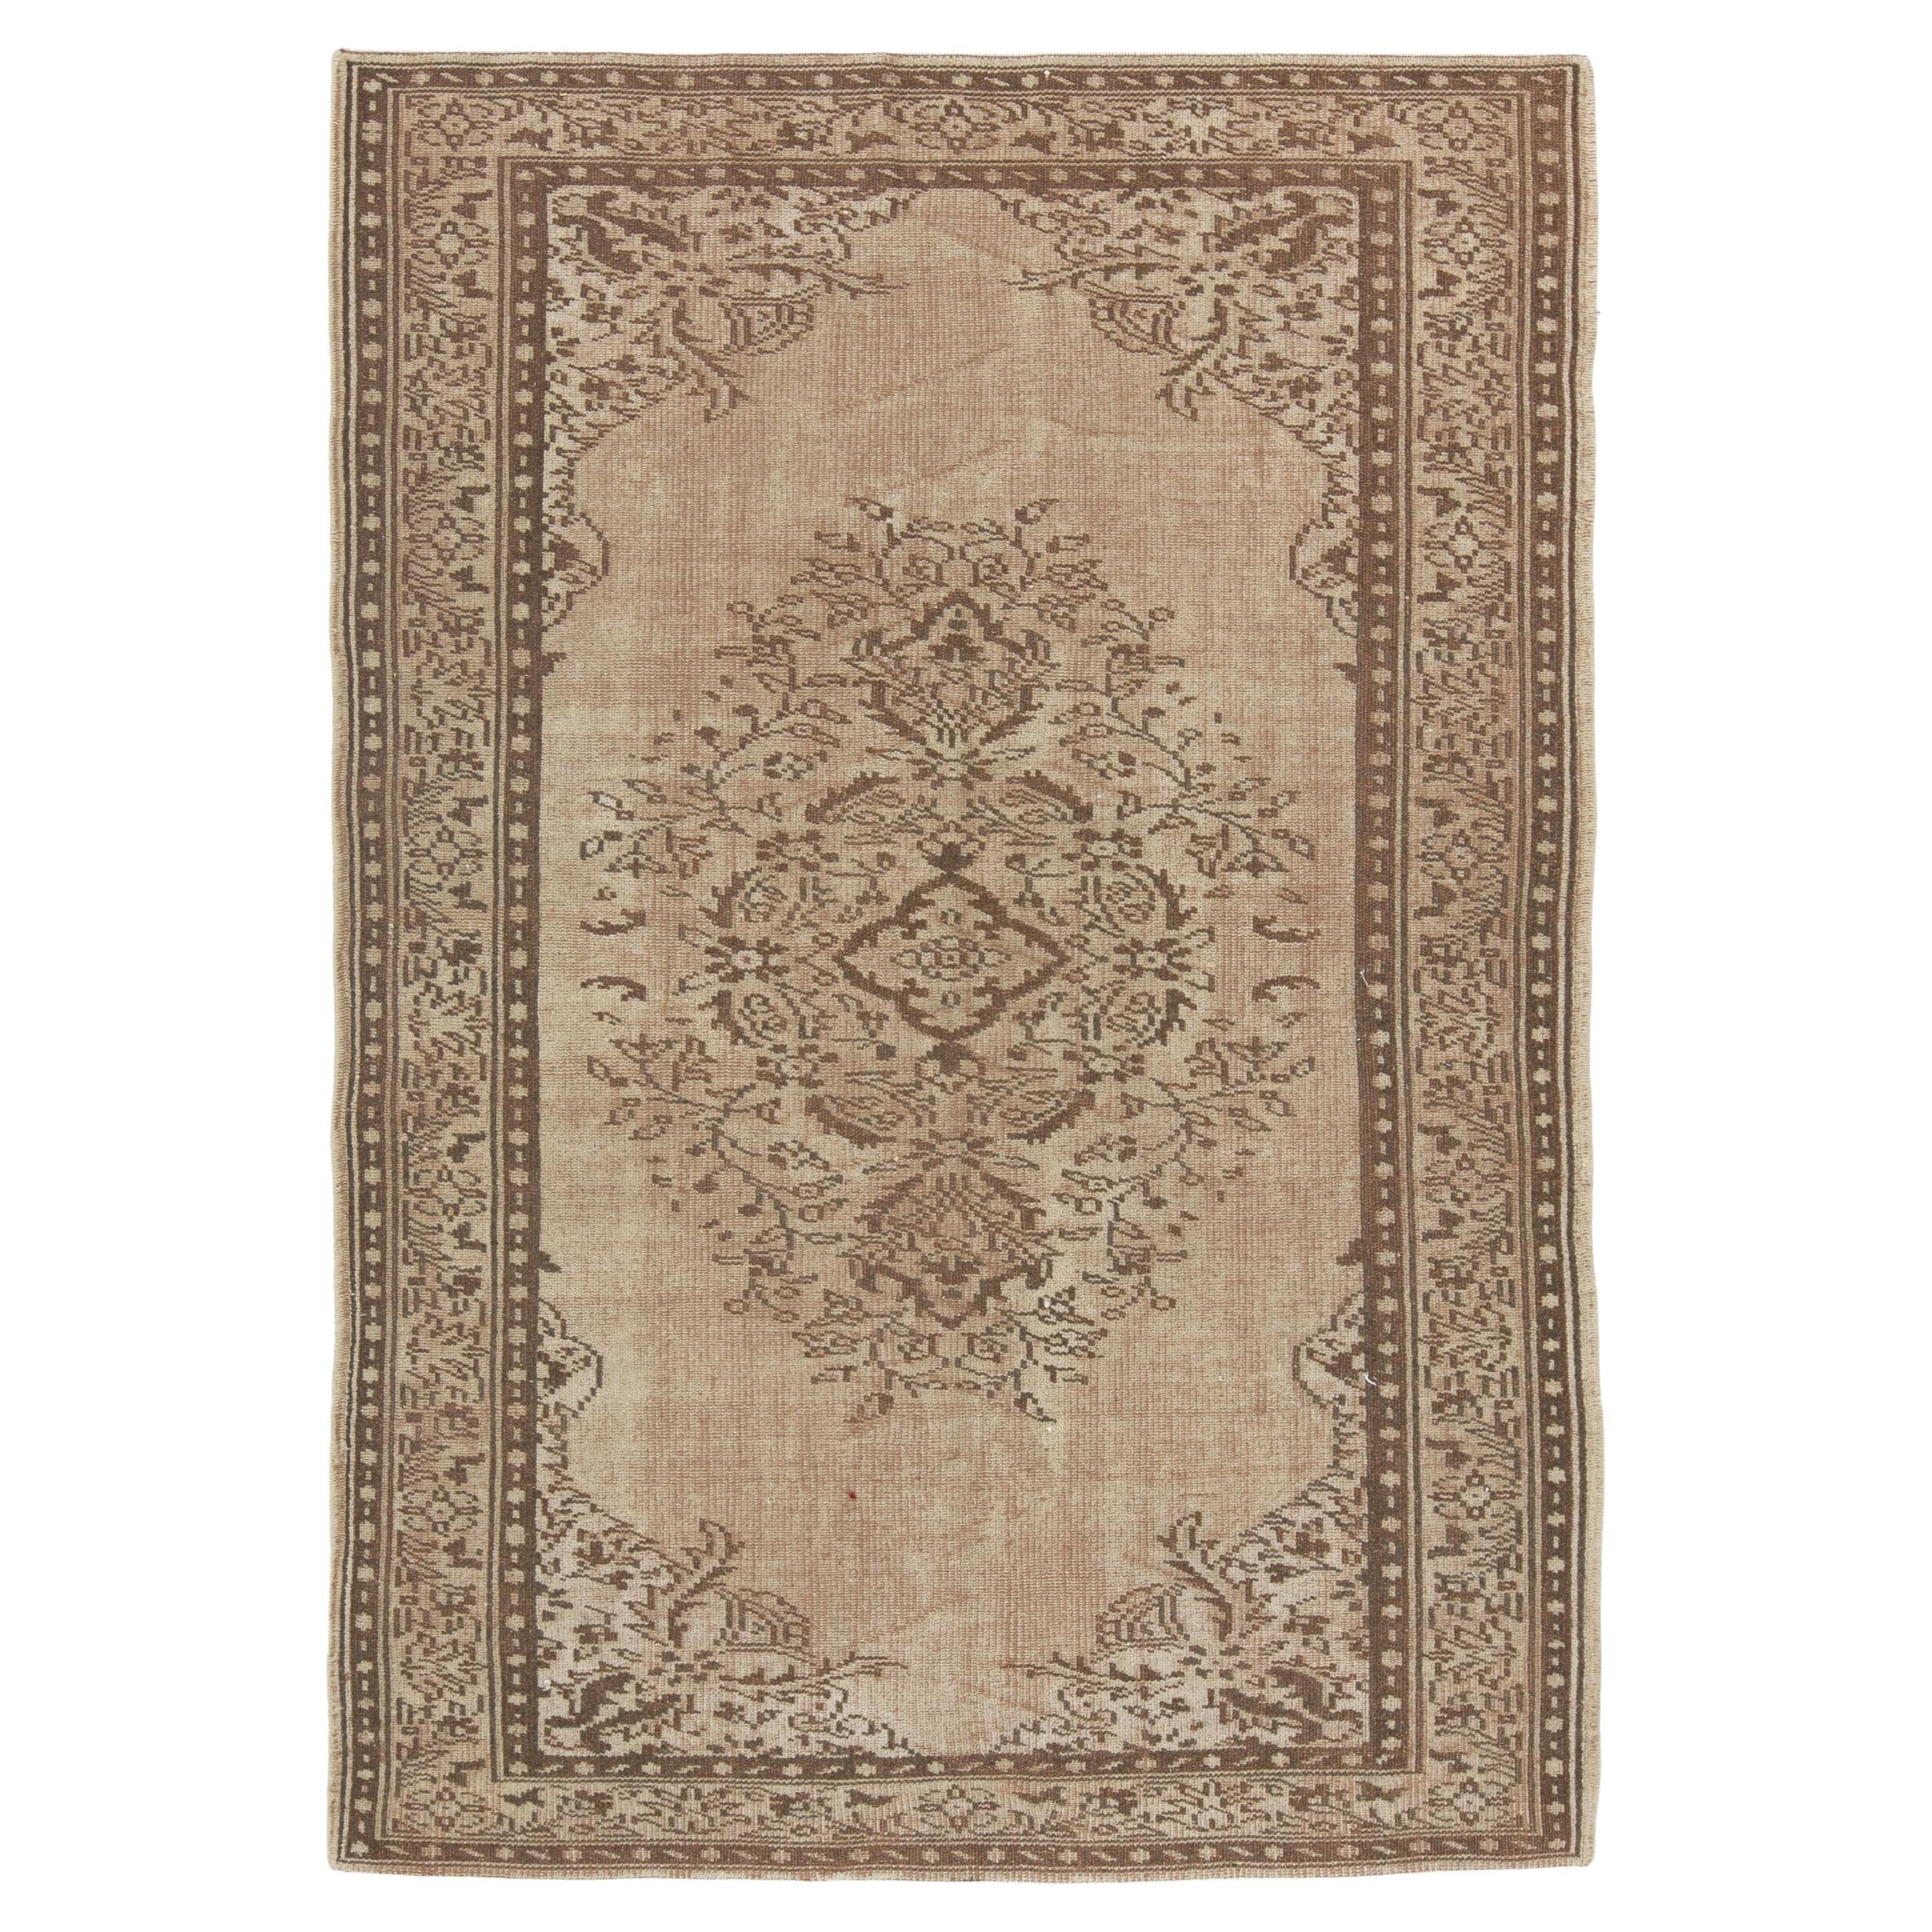 5.4x7.8 Ft Hand-Knotted Vintage Central Anatolian Wool Area Rug in Brown Colors For Sale